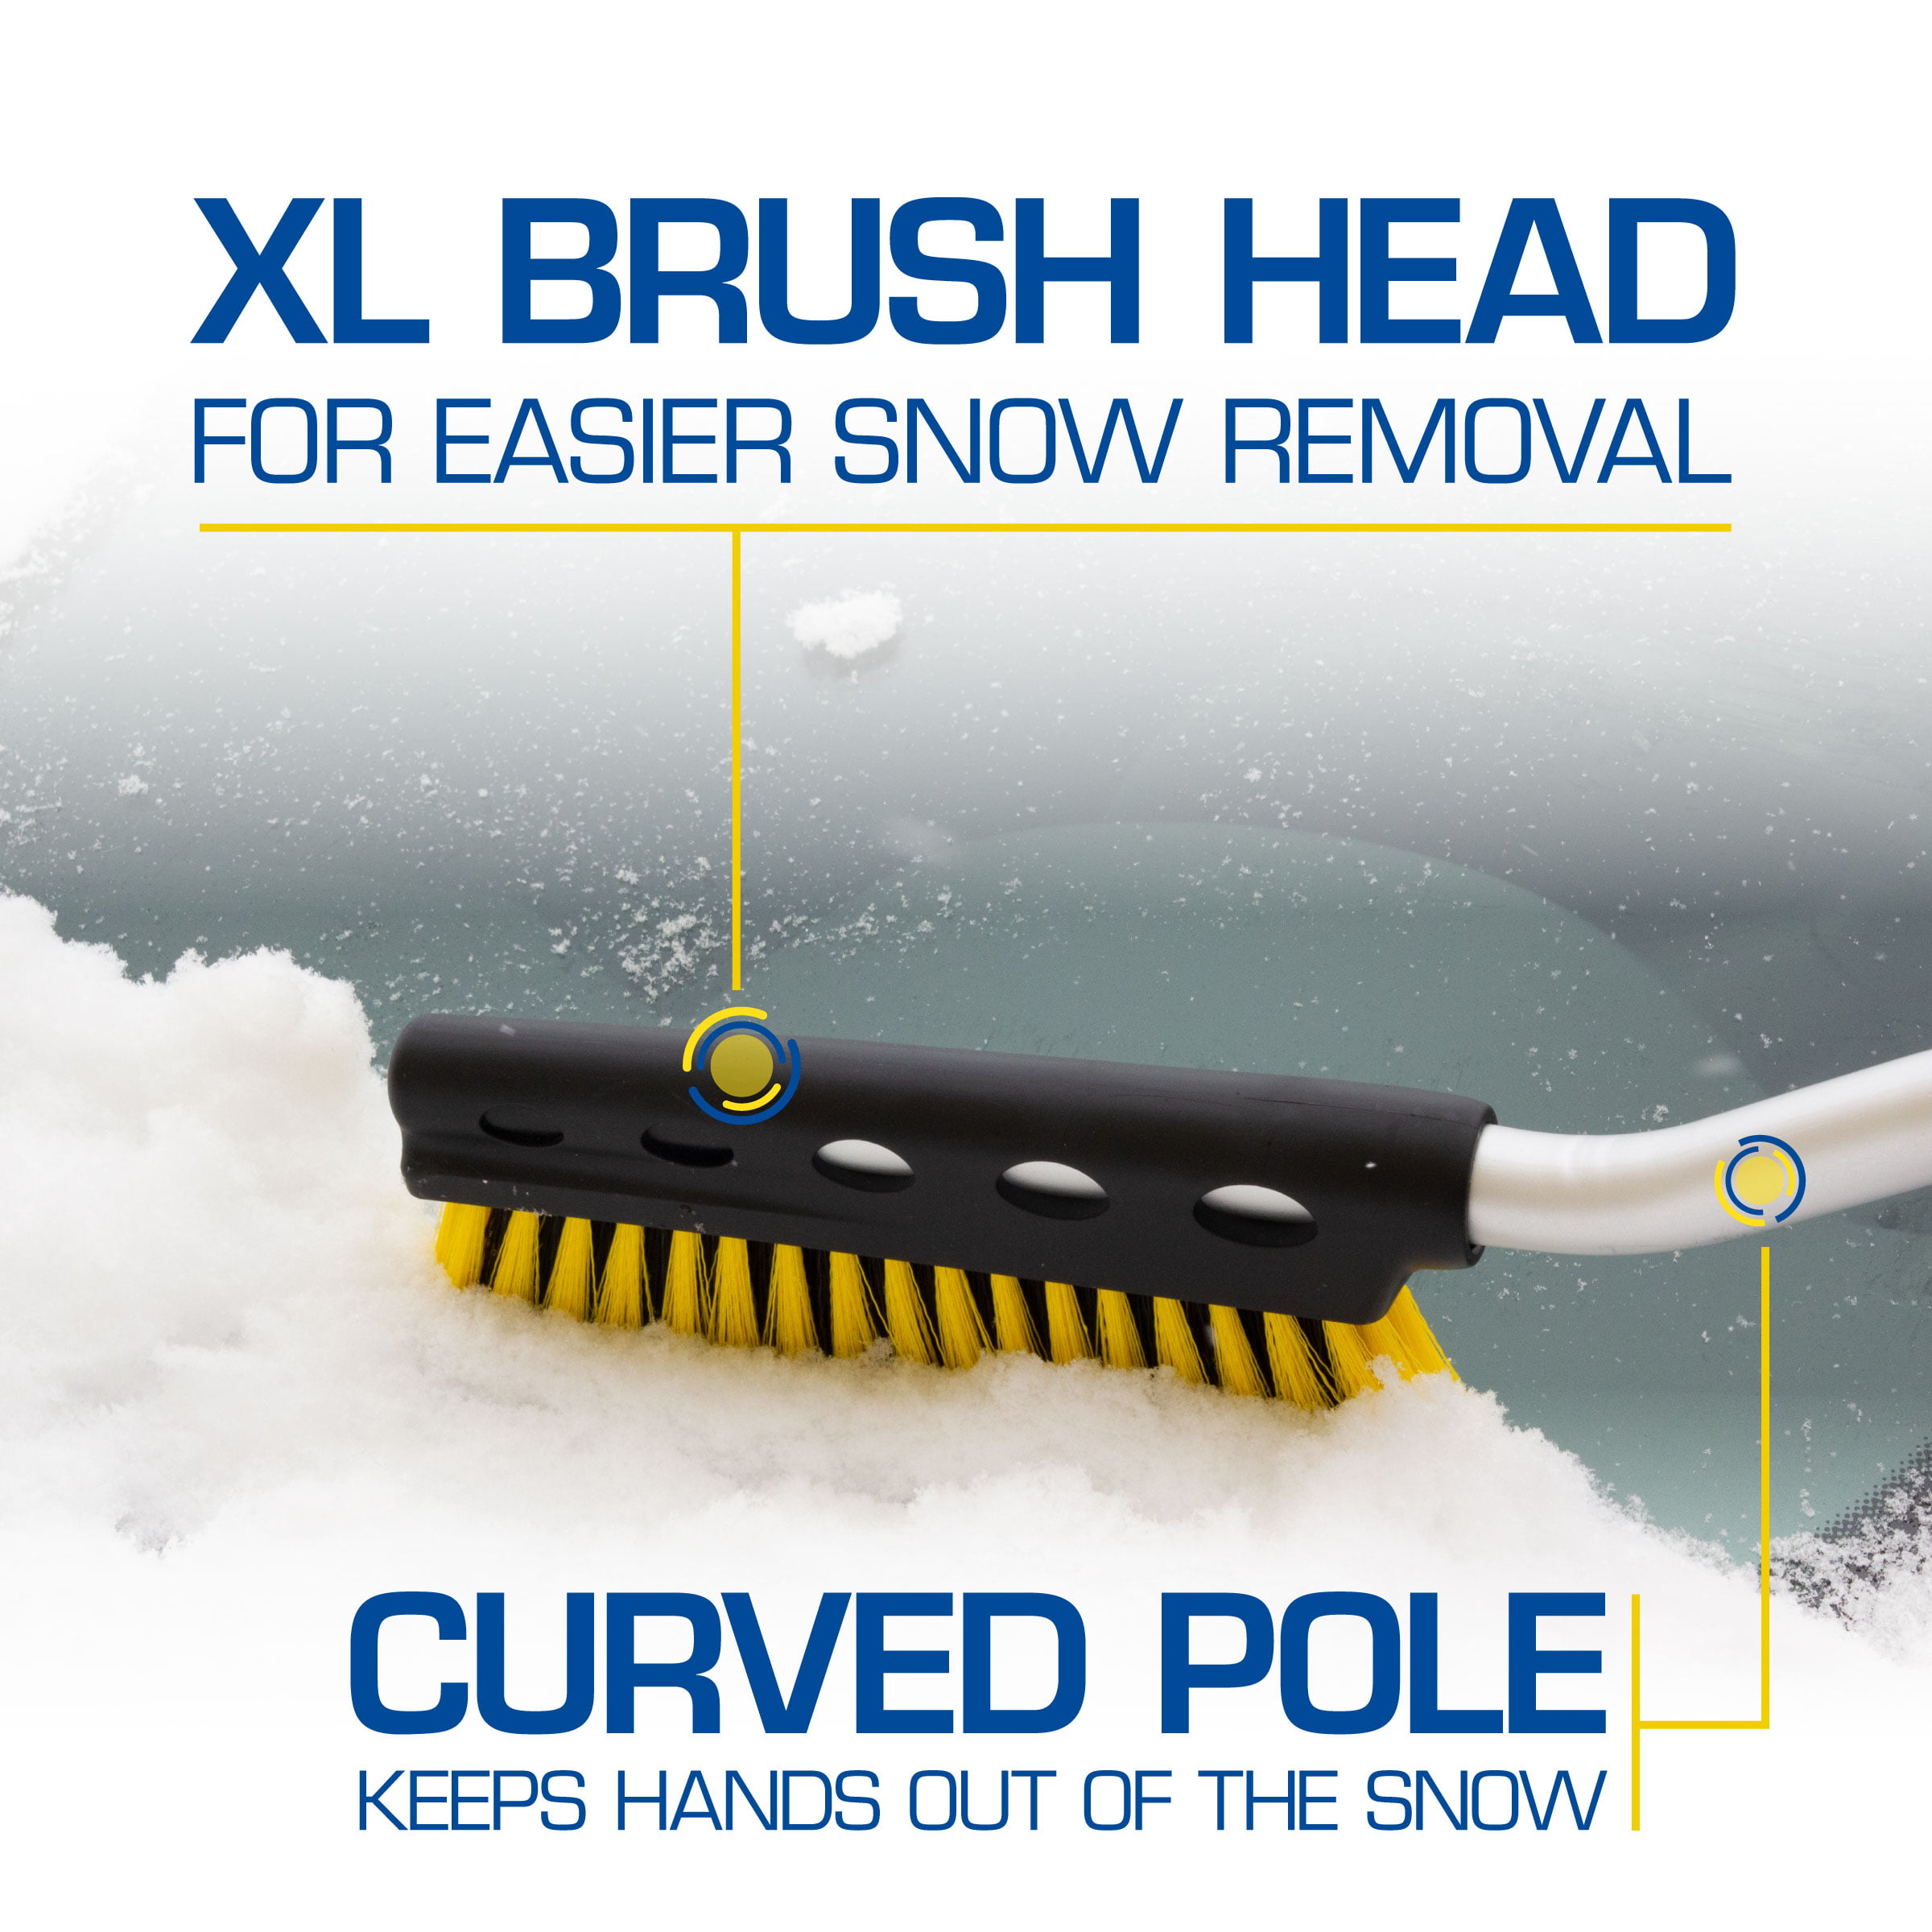 Rain-X 35 Snow Brush Ice Scraper with Curved Handle, Black, Yellow and  Silver, 1 Pack, S8-999PVX 